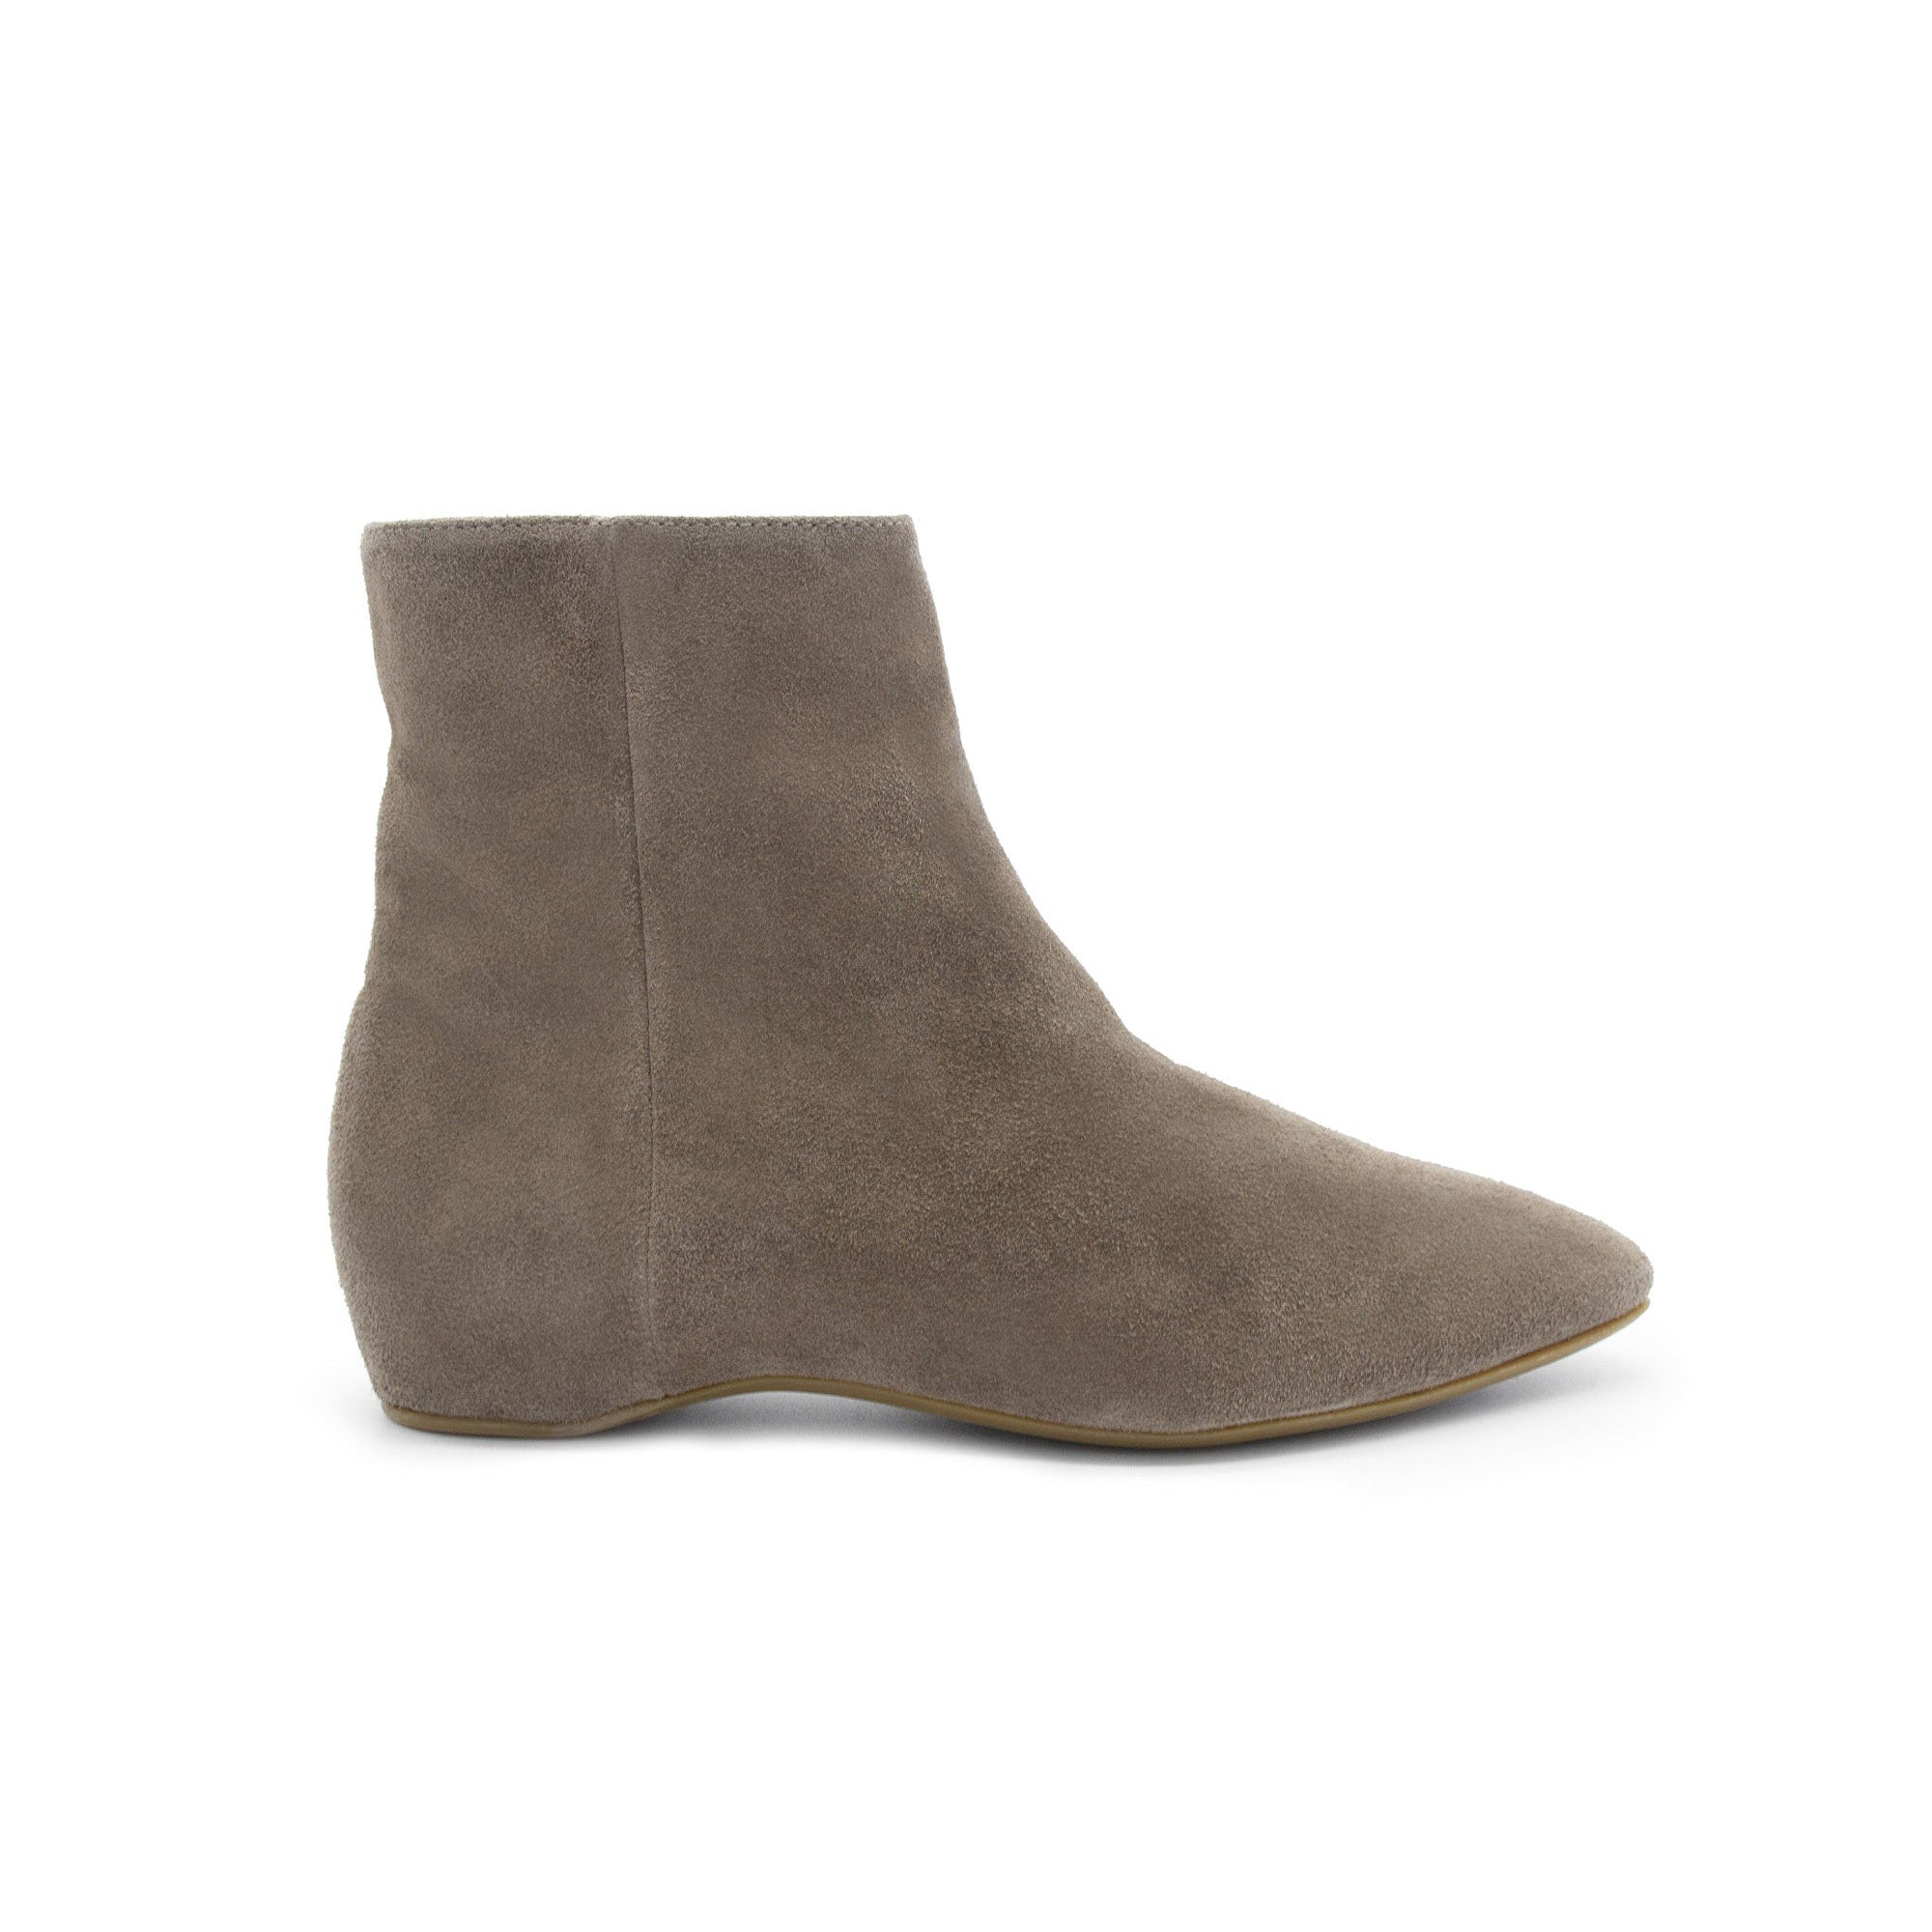 Lilian Ankle Boots | Women’s Ankle Boots | Italian Suede Boots ...